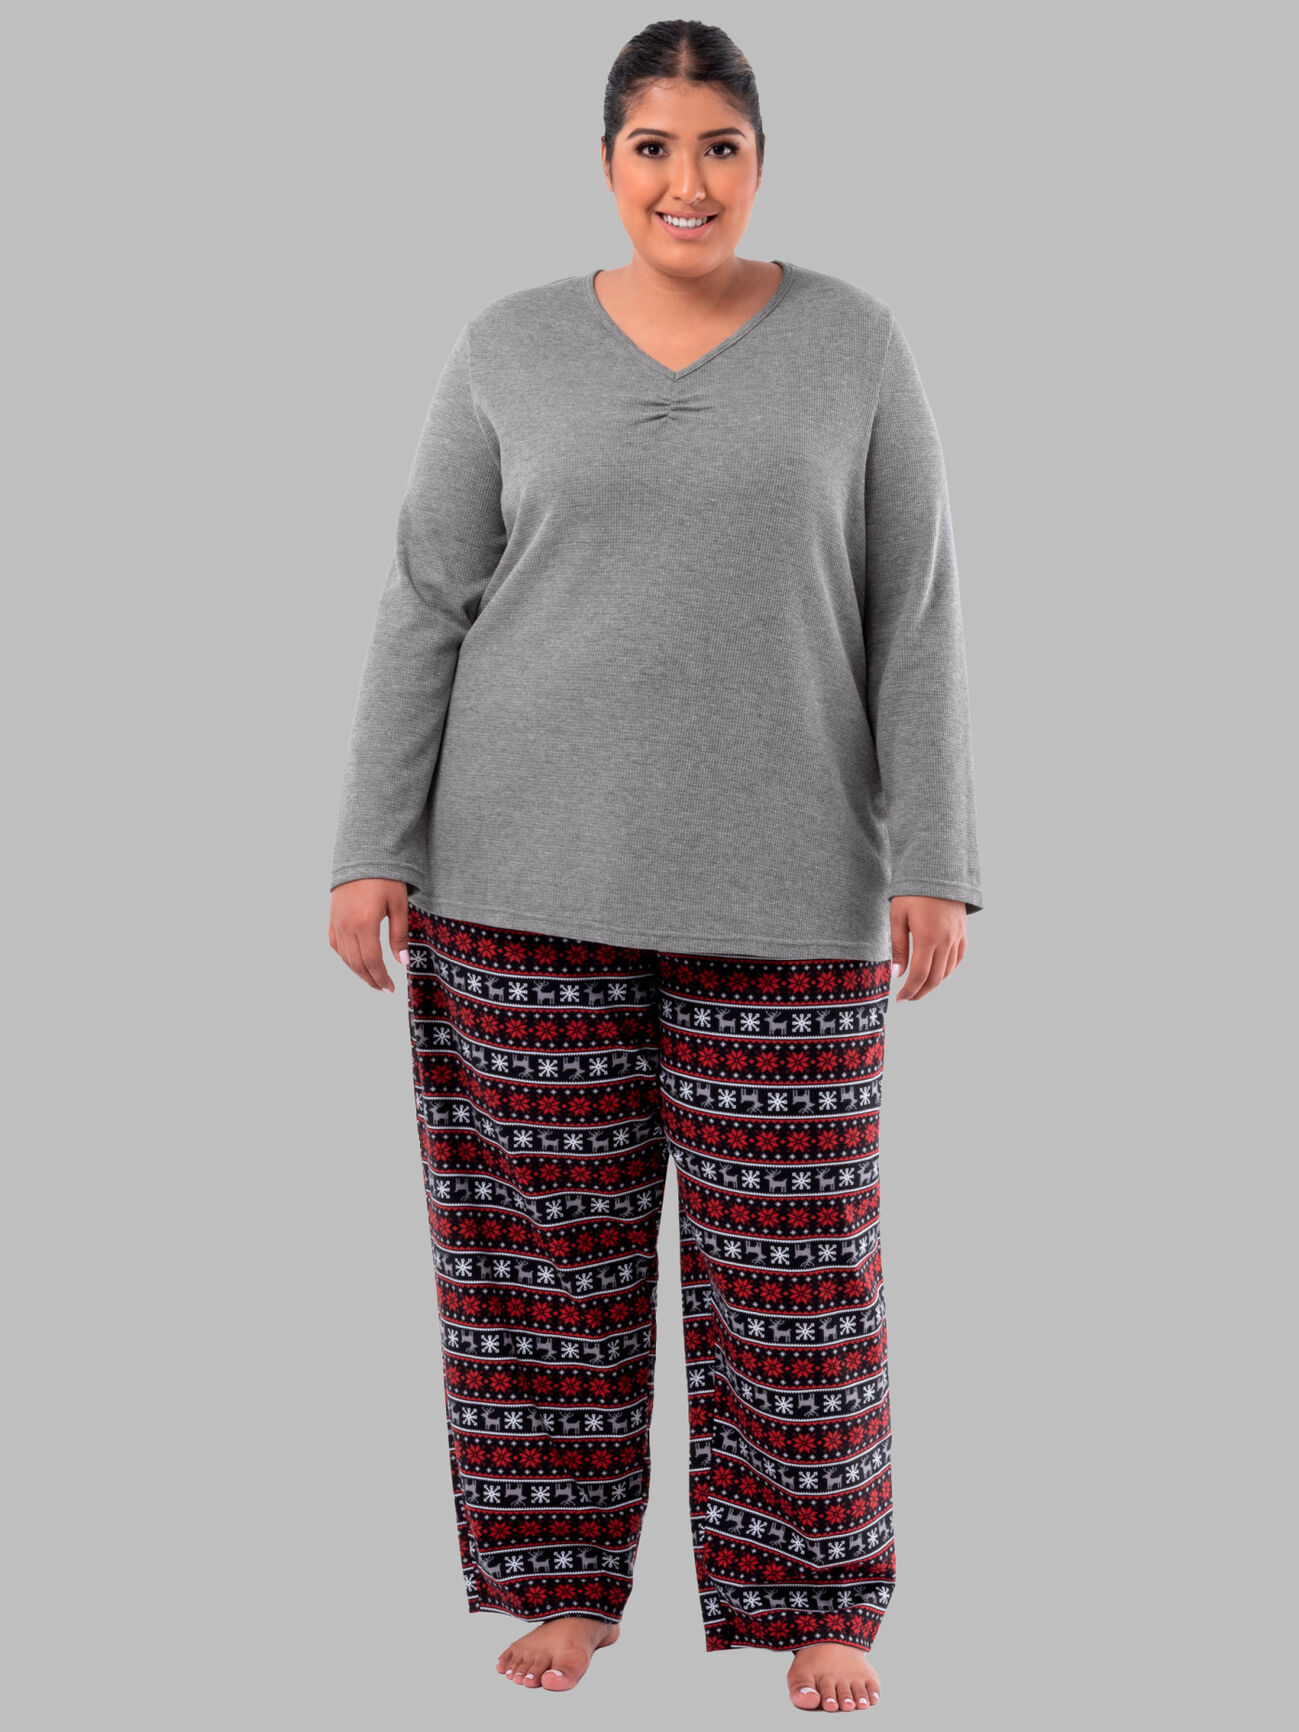 Holiday pajamas  Flannel pajama sets, Pants for women, Flannel